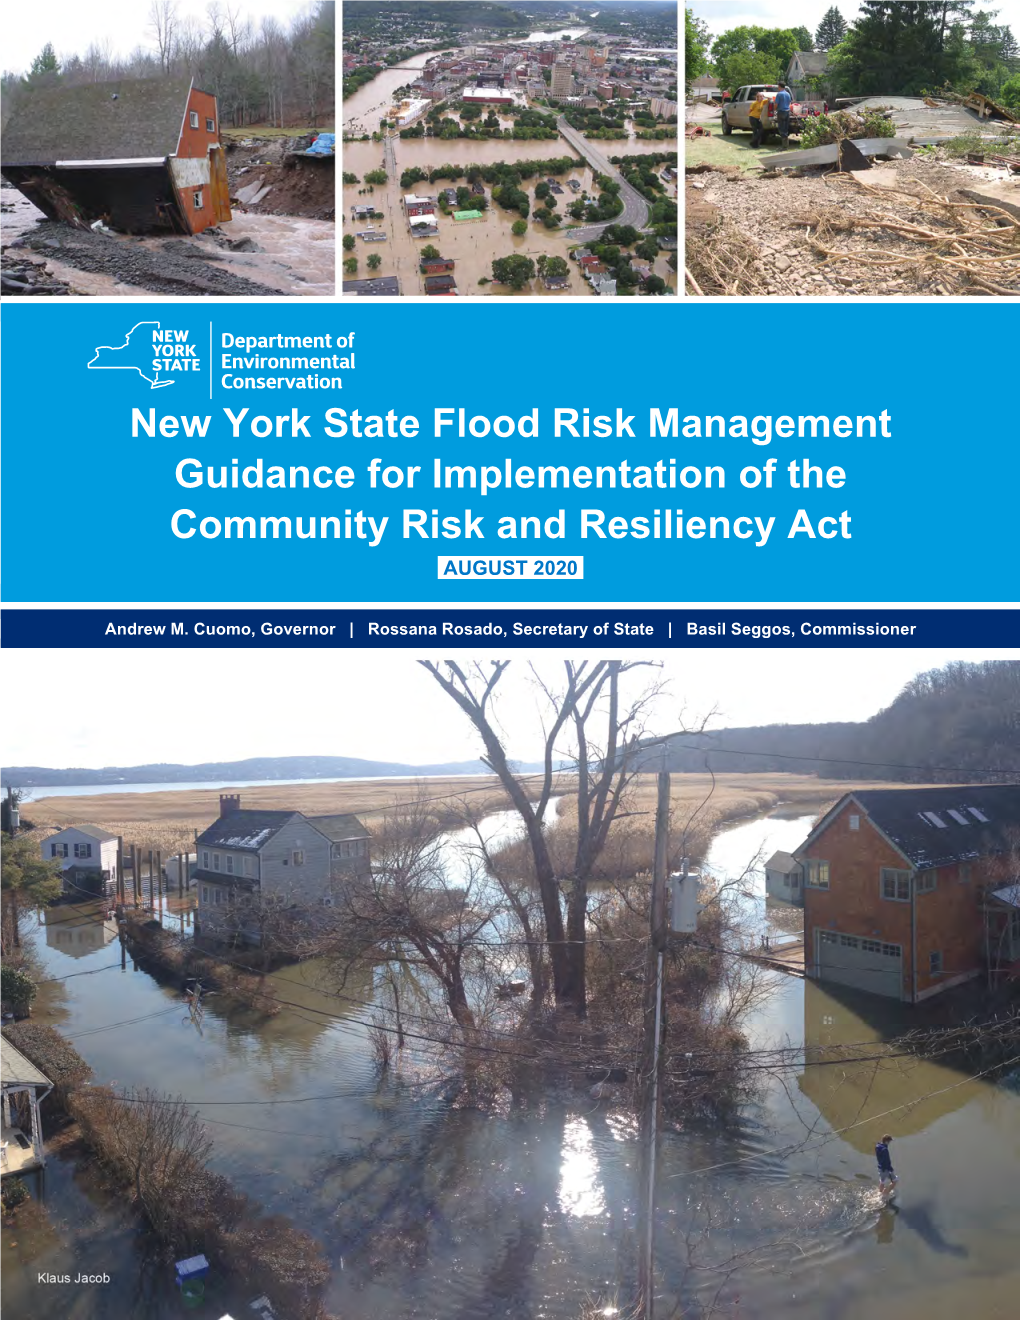 New York State Flood Risk Management Guidance for Implementation of the Community Risk and Resiliency Act AUGUST 2020